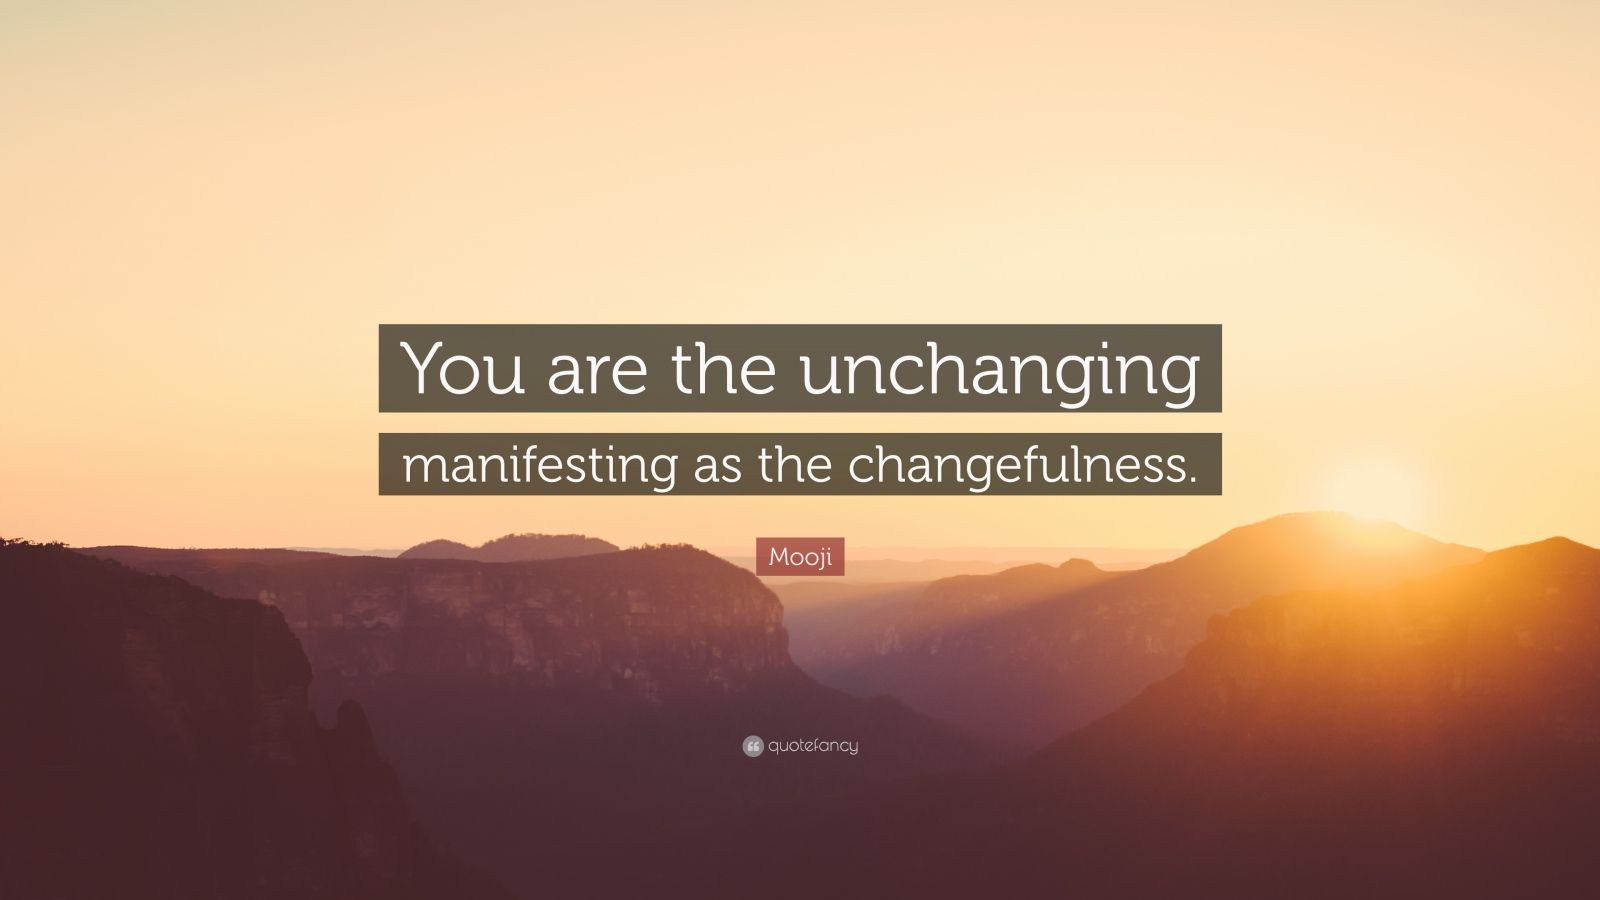 mooji quote: "you are the unchanging manifesting as the change